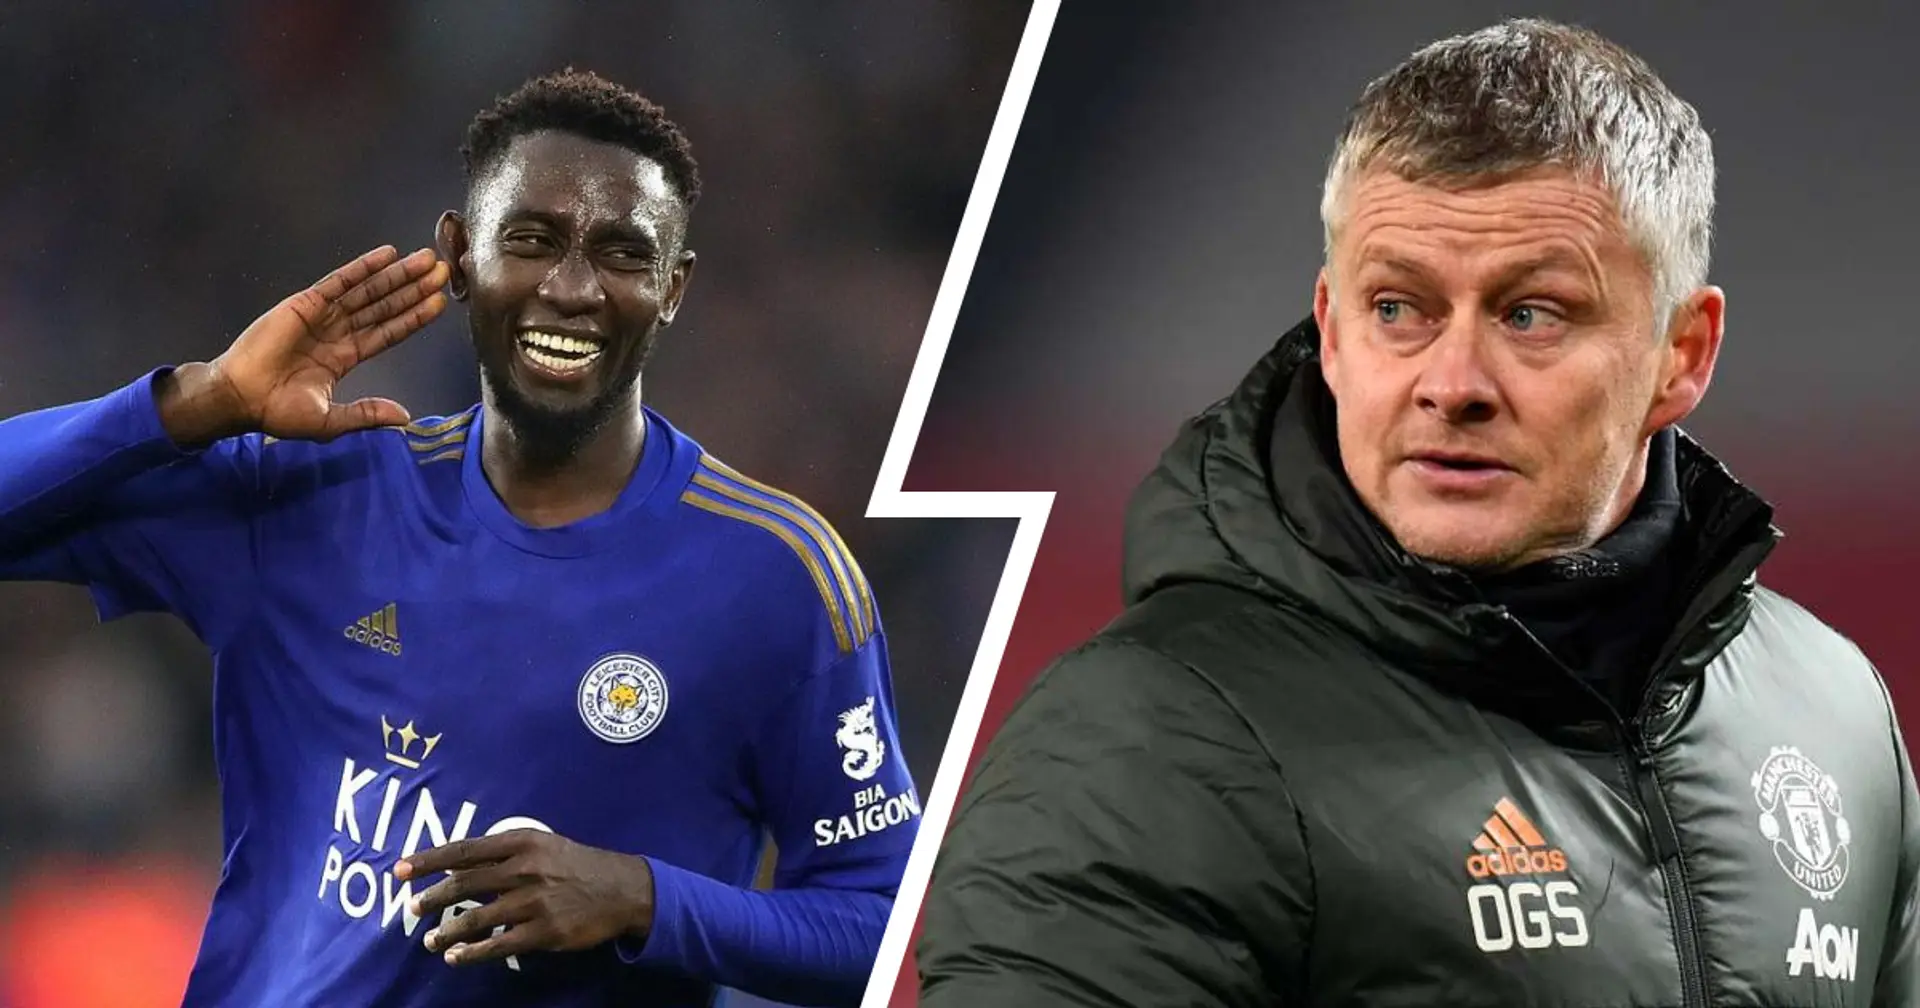 Wilfred Ndidi on facing Man United: 'The last time we met, we knocked them out of the FA Cup' 